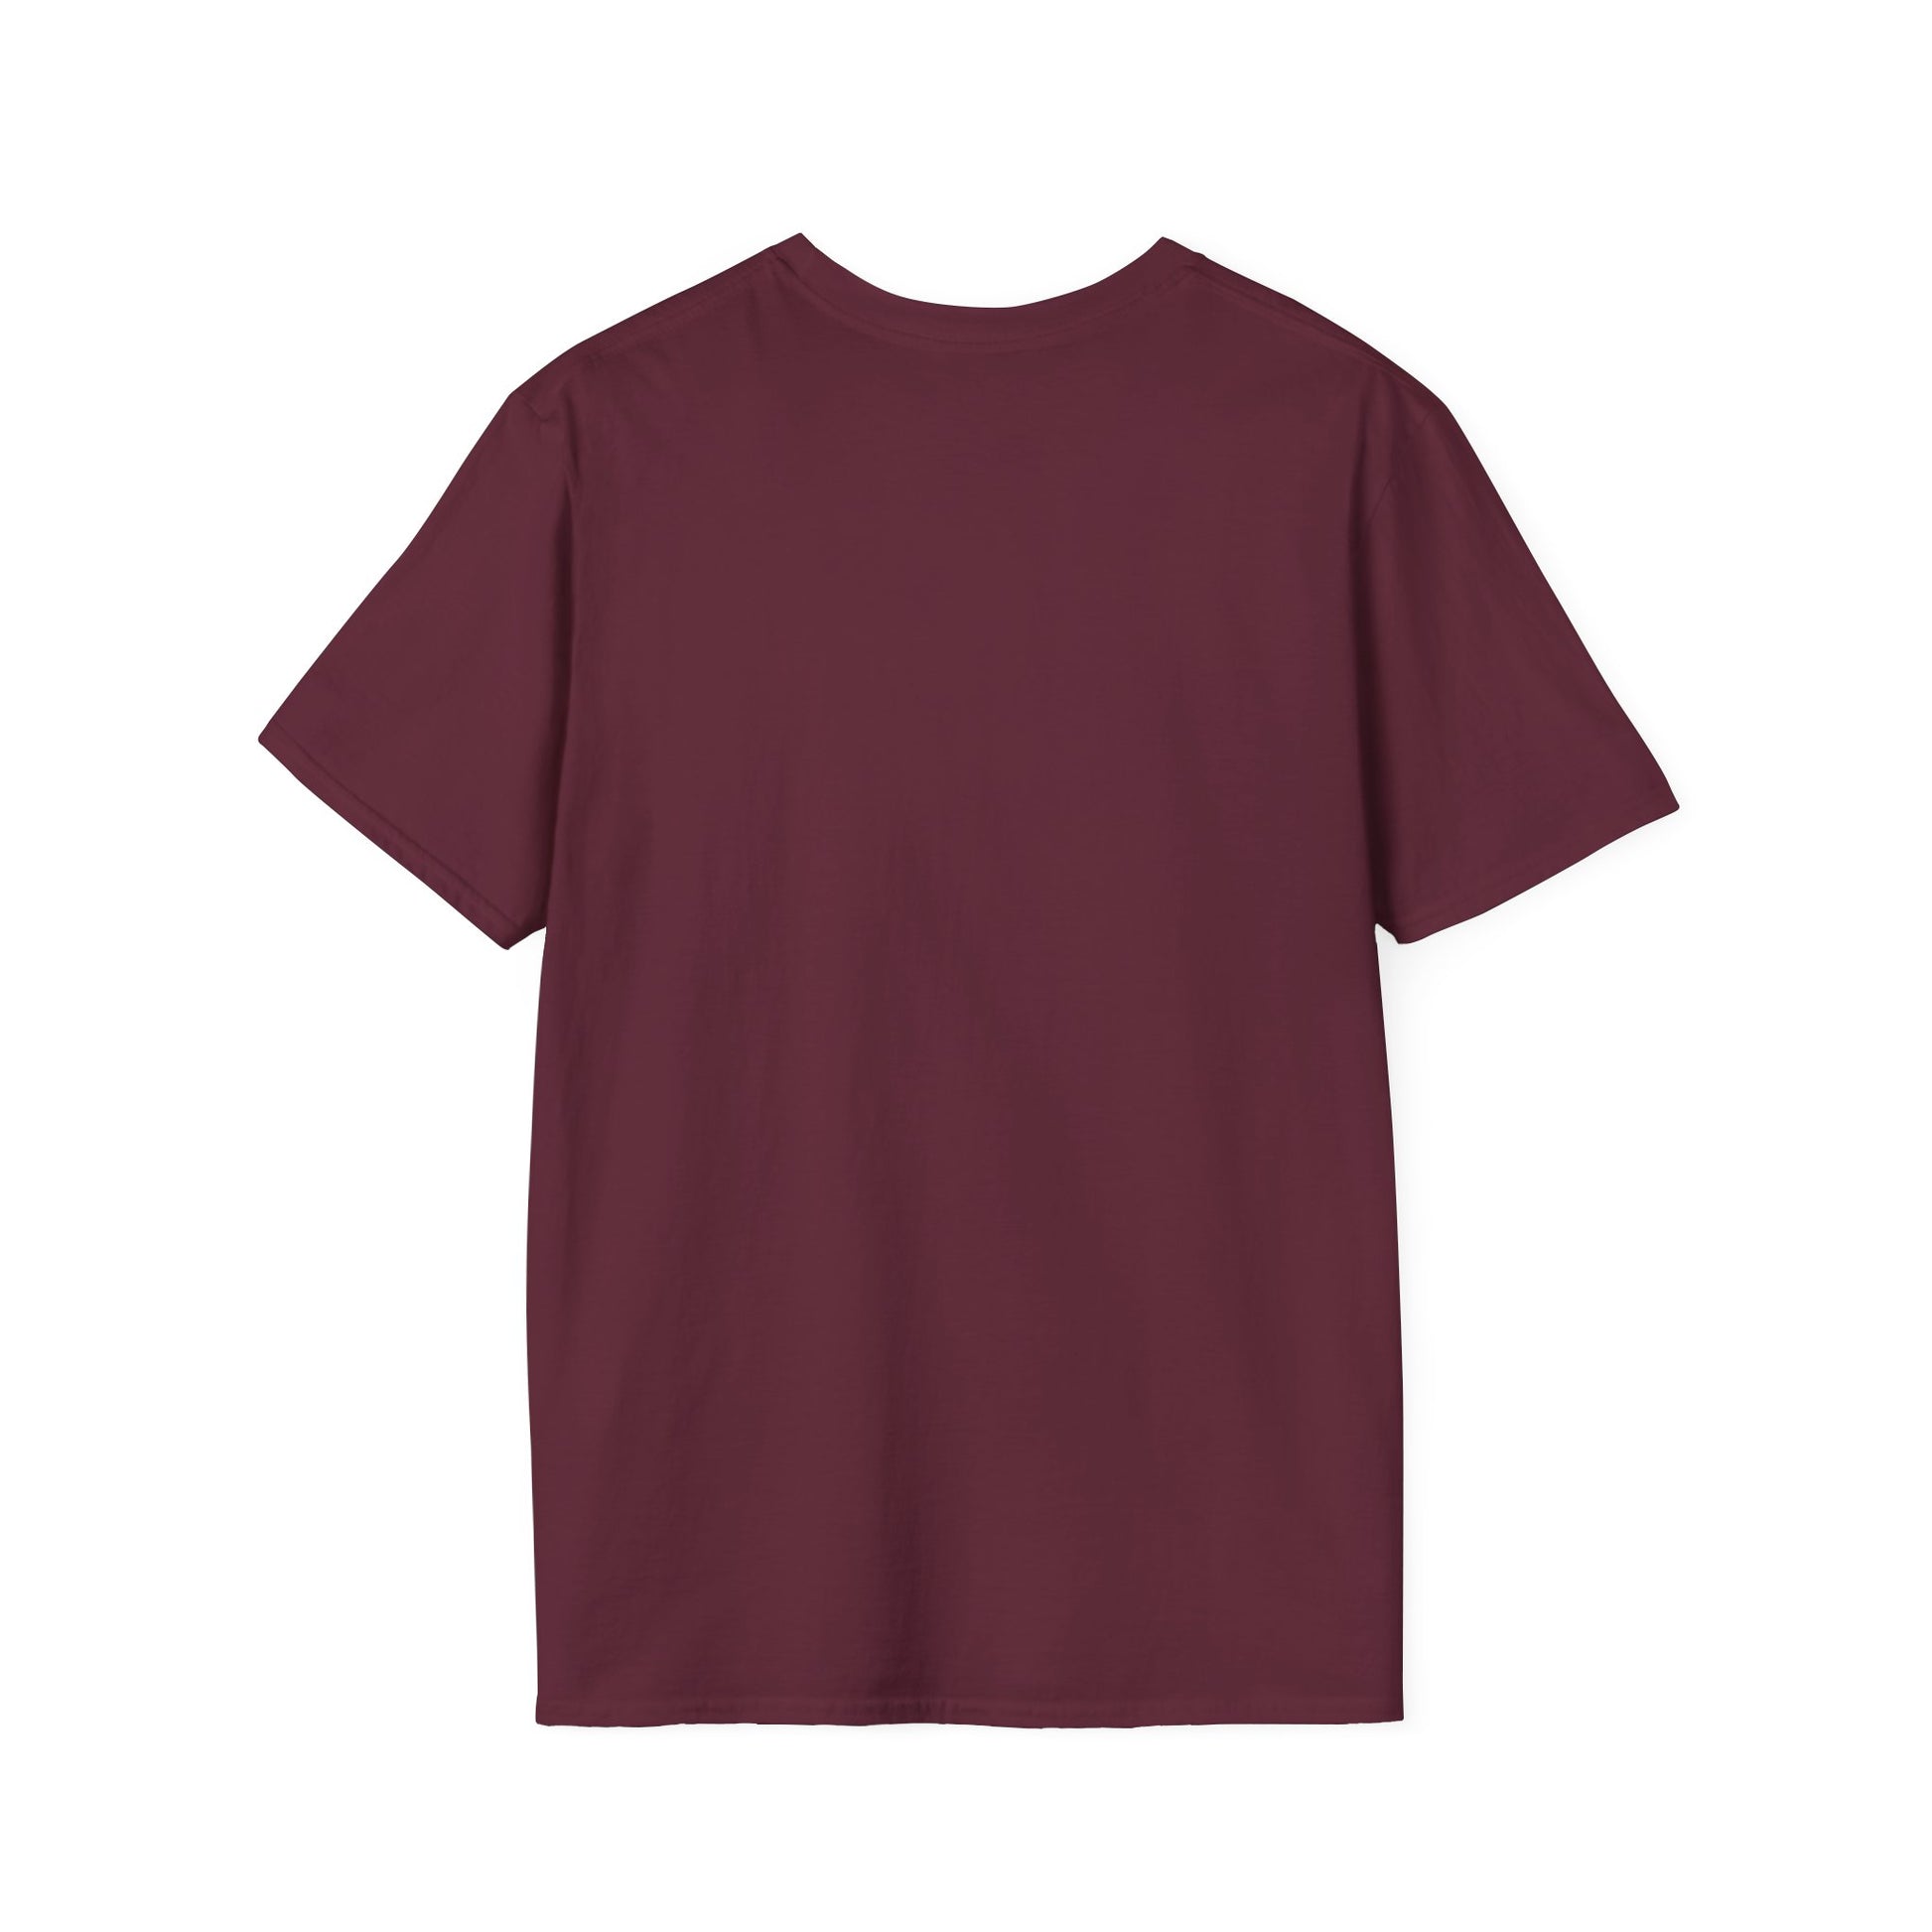 Plain maroon Unisex Softstyle Logo T-Shirt displayed against a white background, featuring a subtle "Cabbagetown Toronto" text with no other visible logos. (Brand Name: Printify)